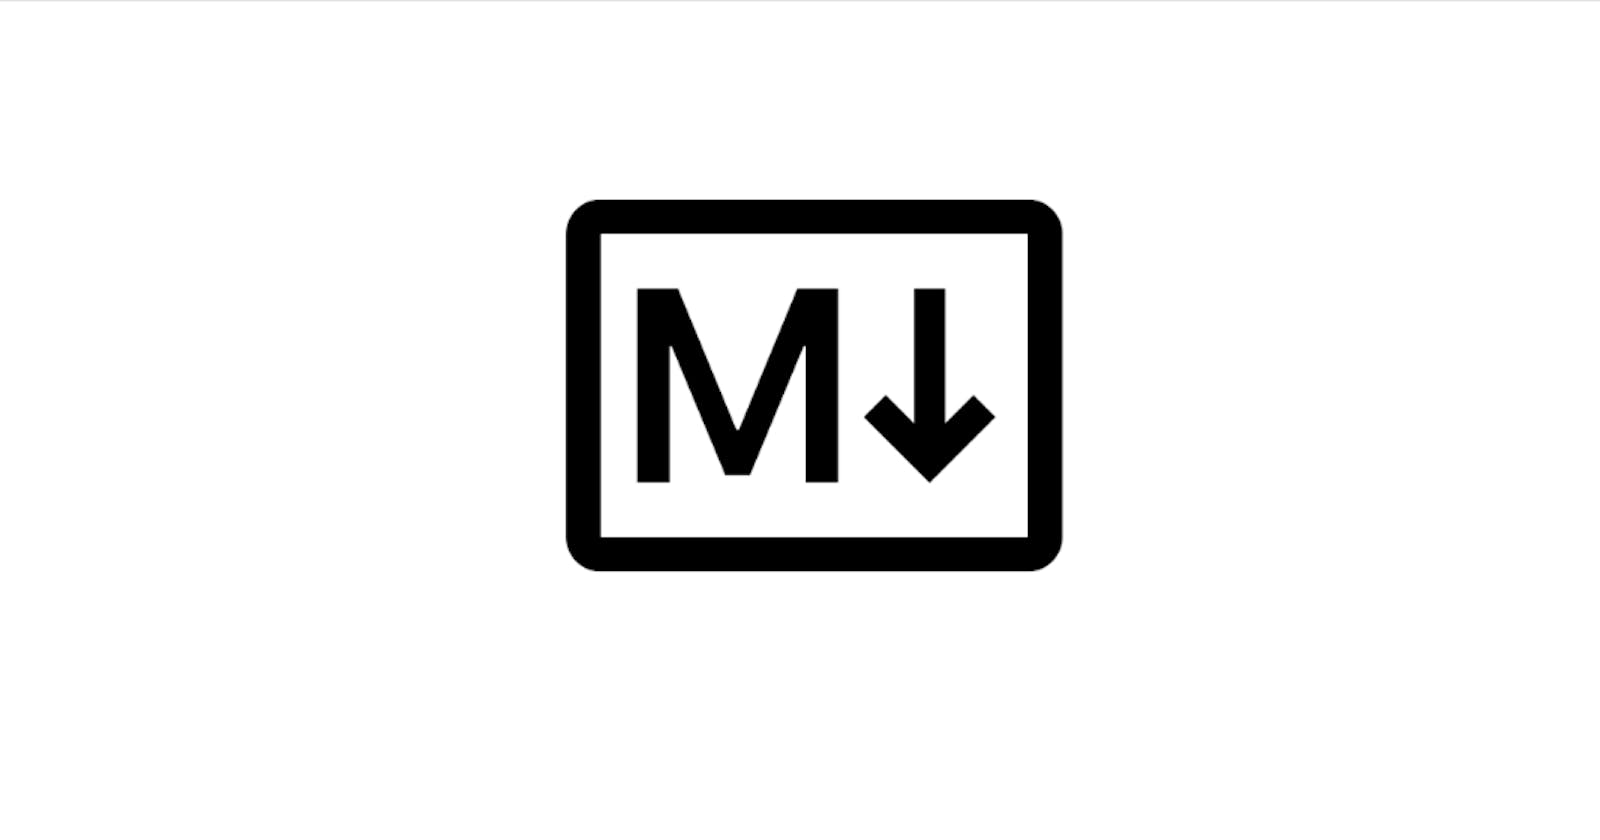 A quick reference to  Markdown